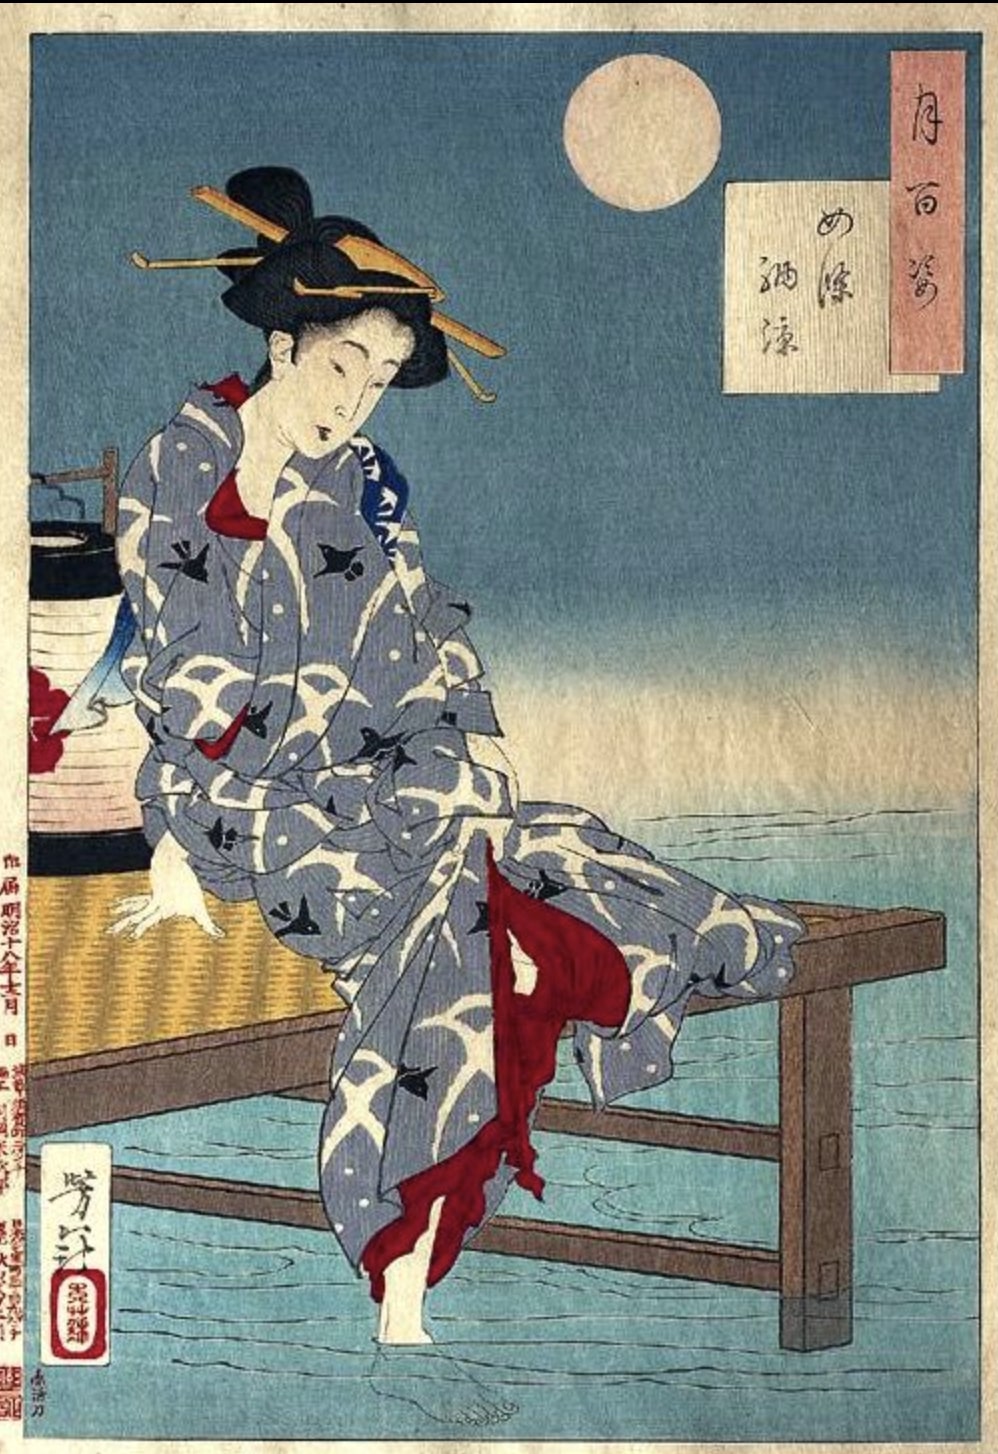 The Japan Art Collection